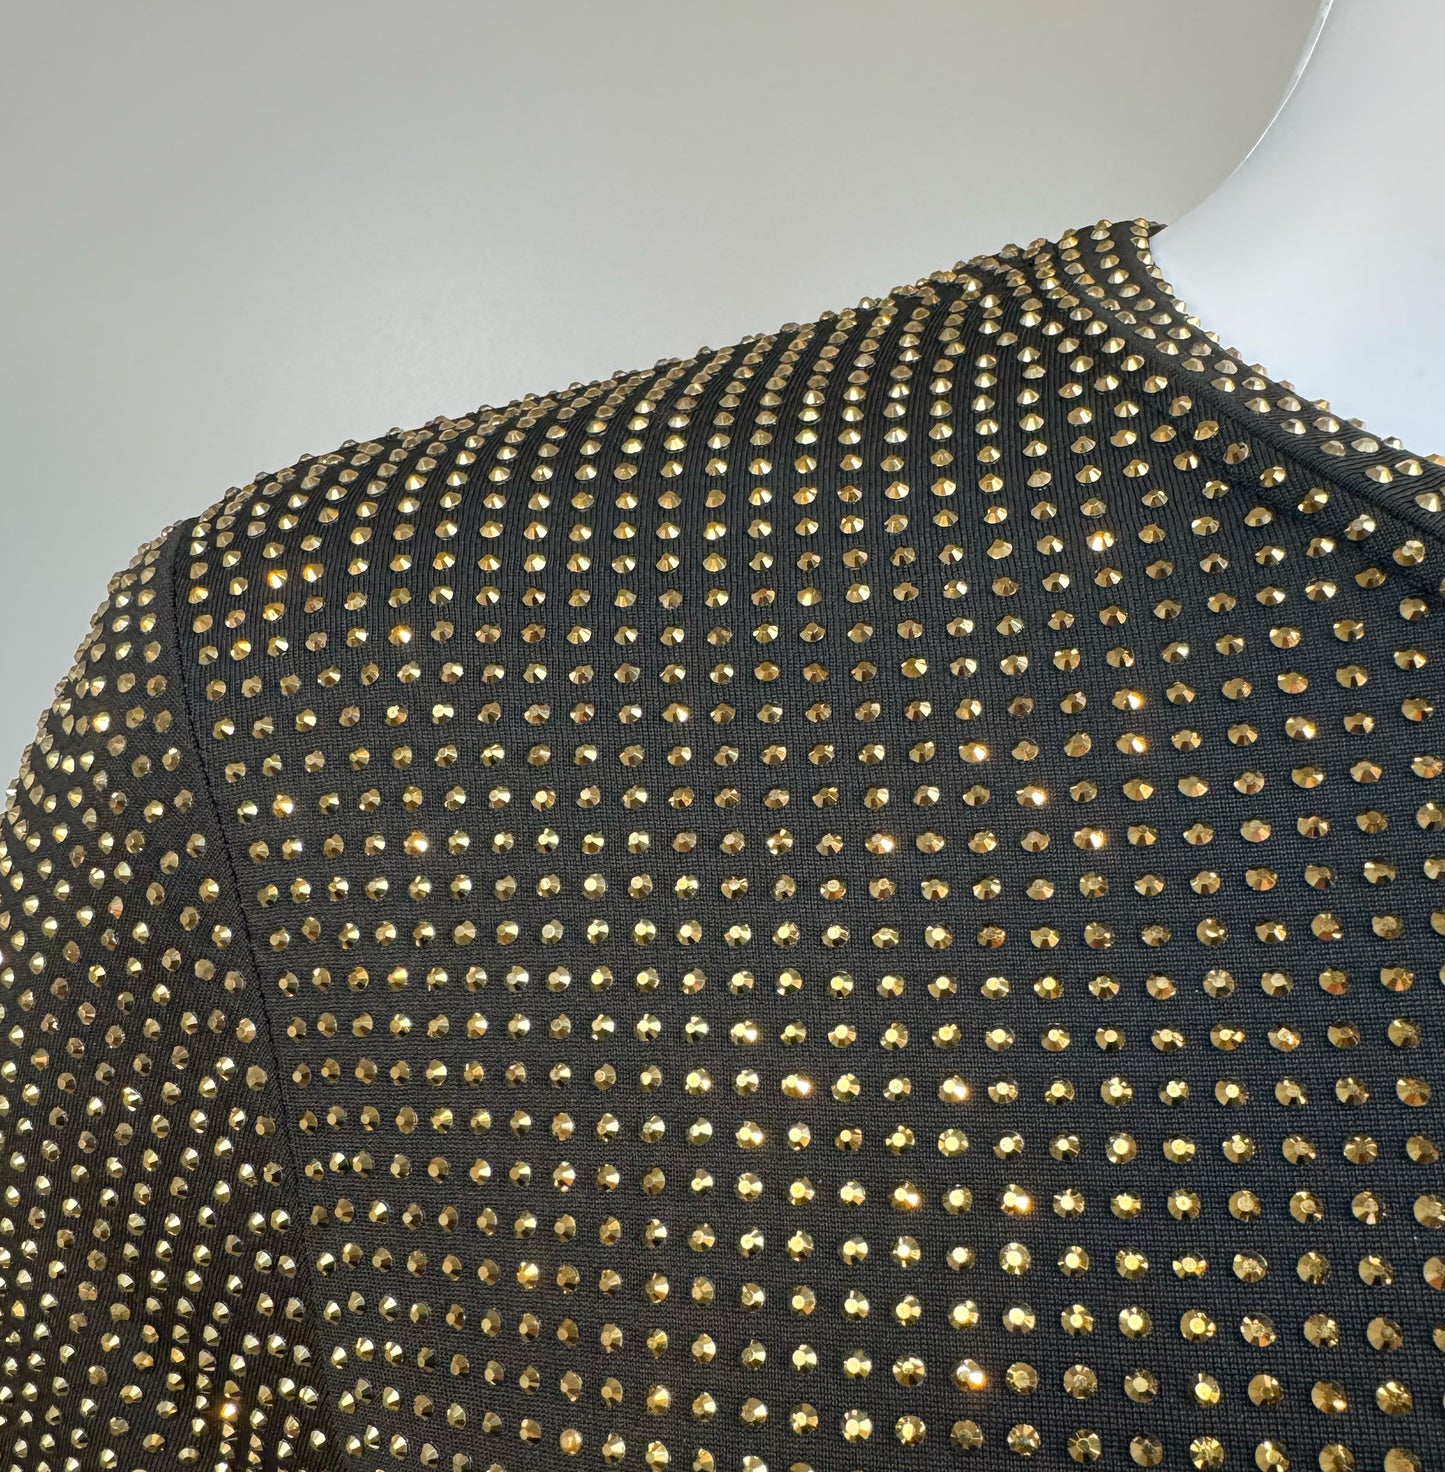 Shoulder detail of Gold Aurum Crystals on Black Fabric T-shirt revealing the impeccable construction of this complex garment.